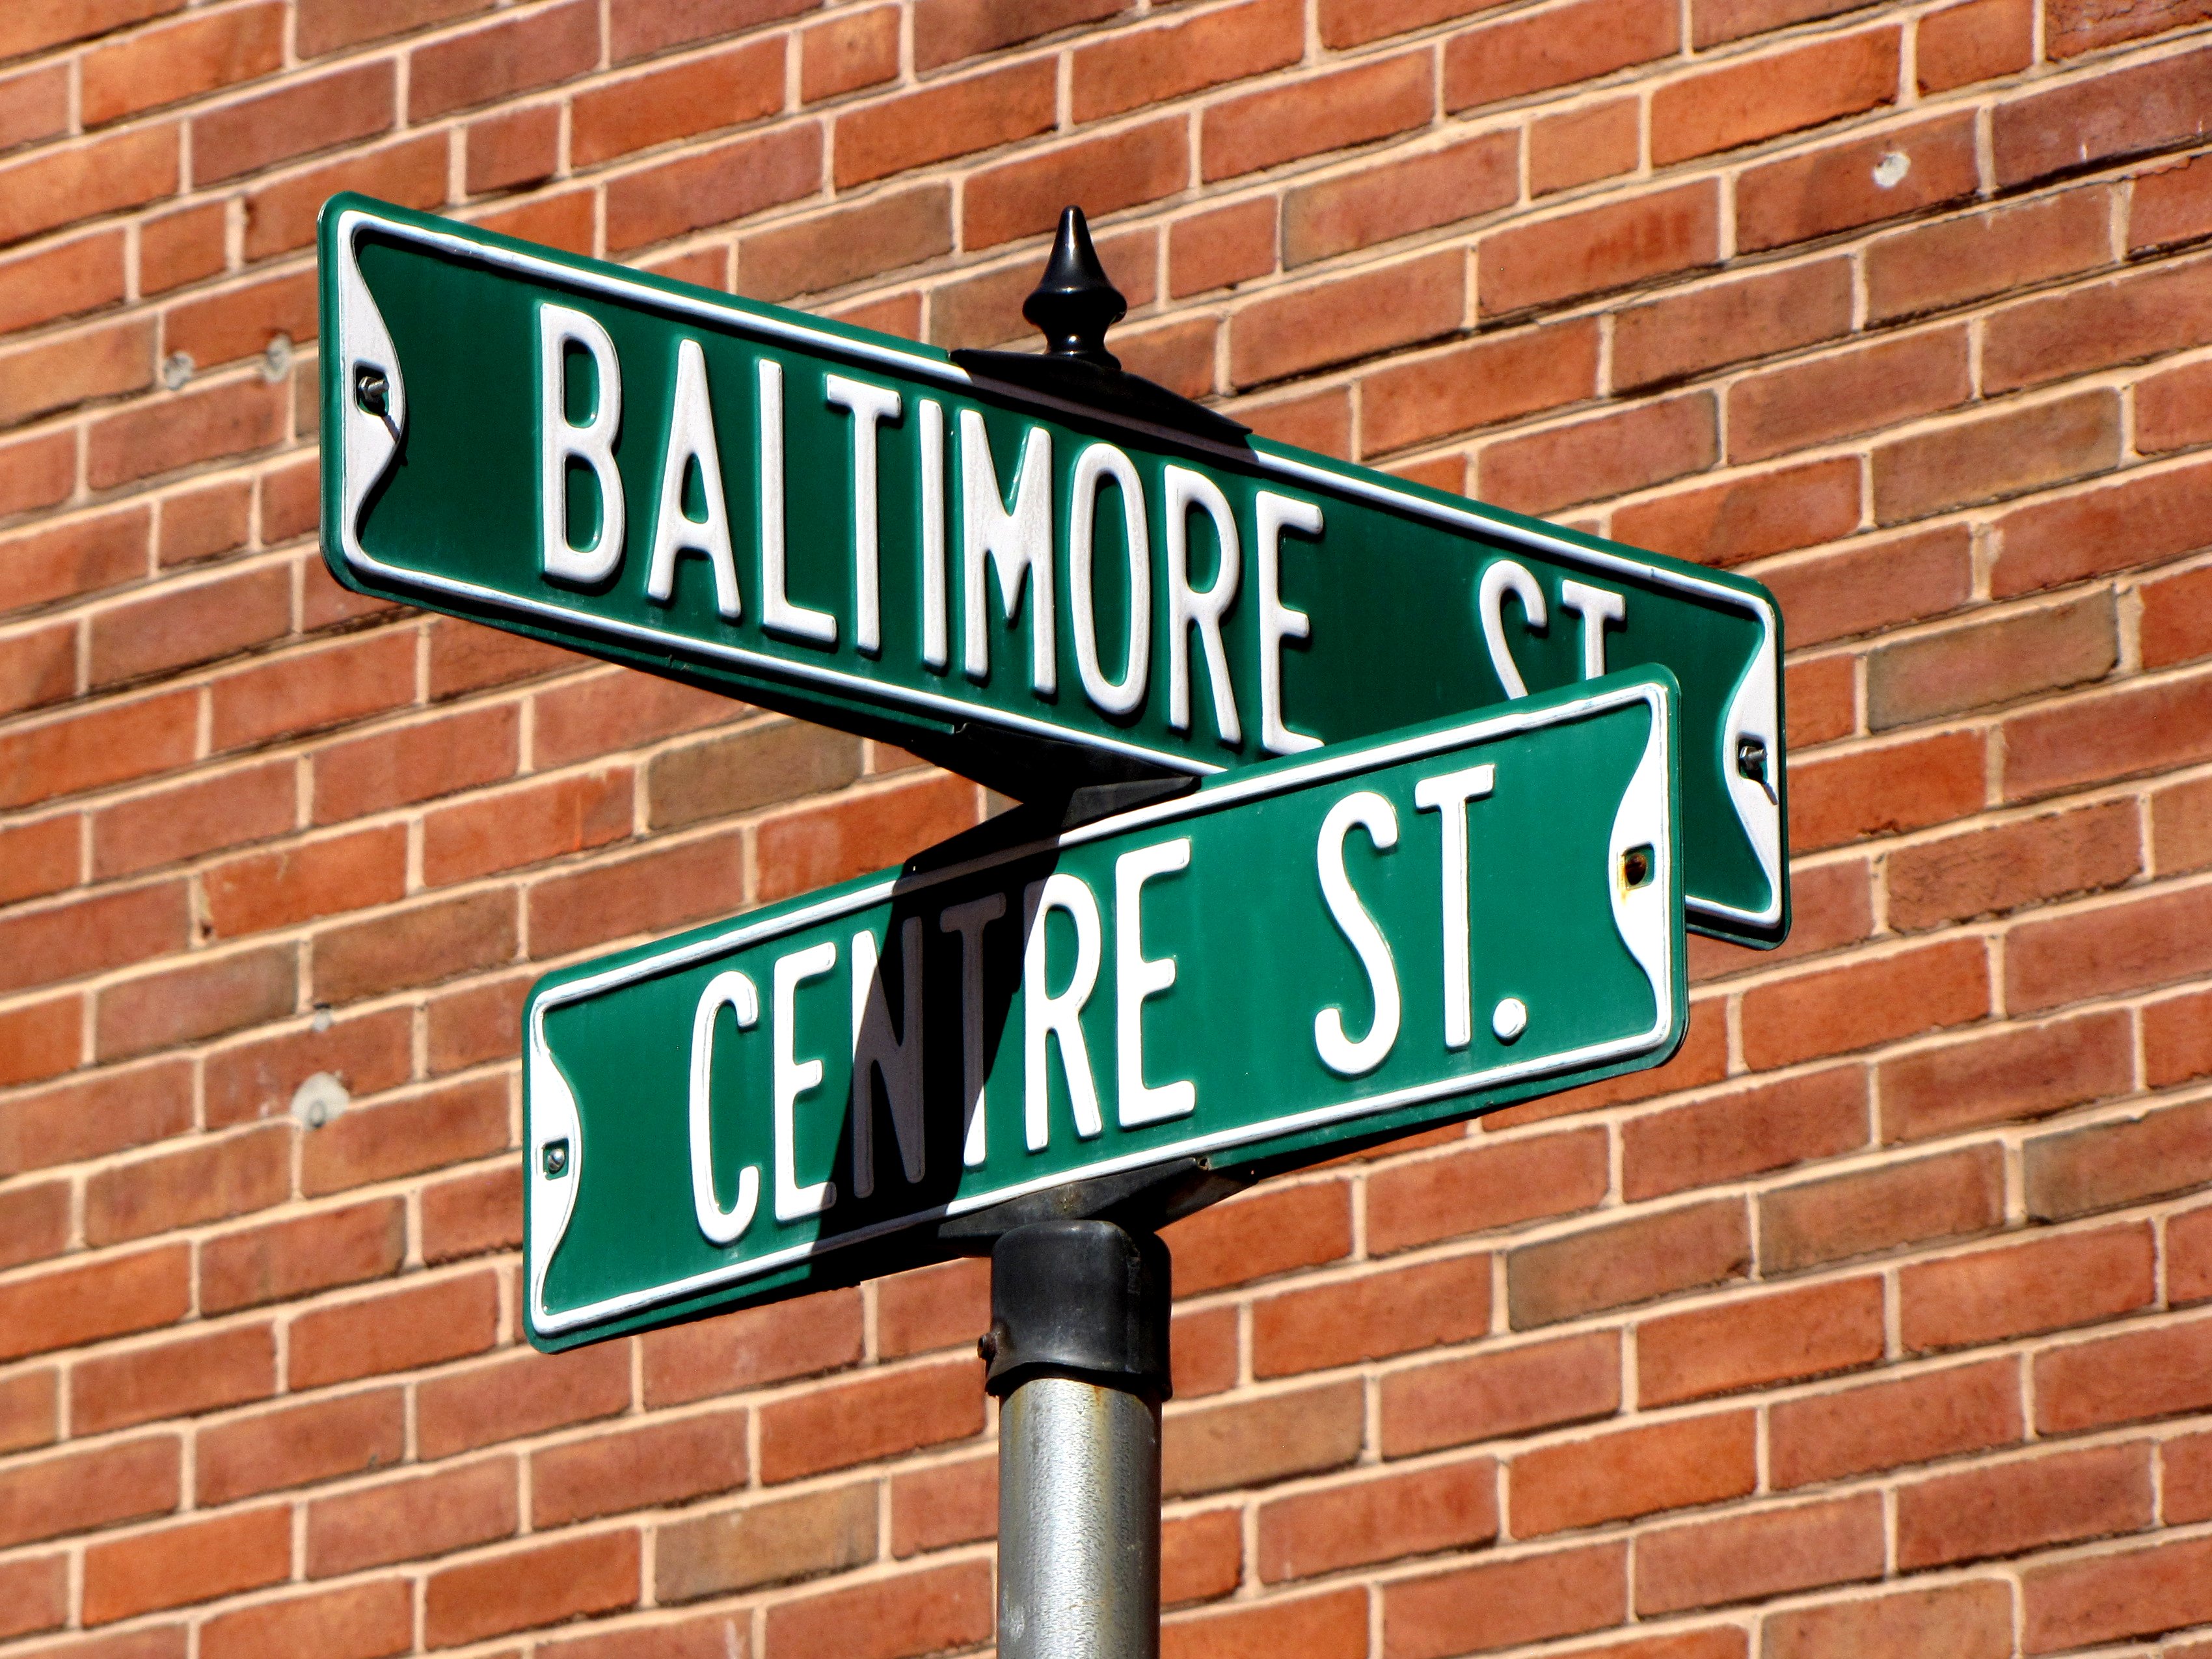 Street signs at the intersection of Baltimore and Centre Streets in downtow...